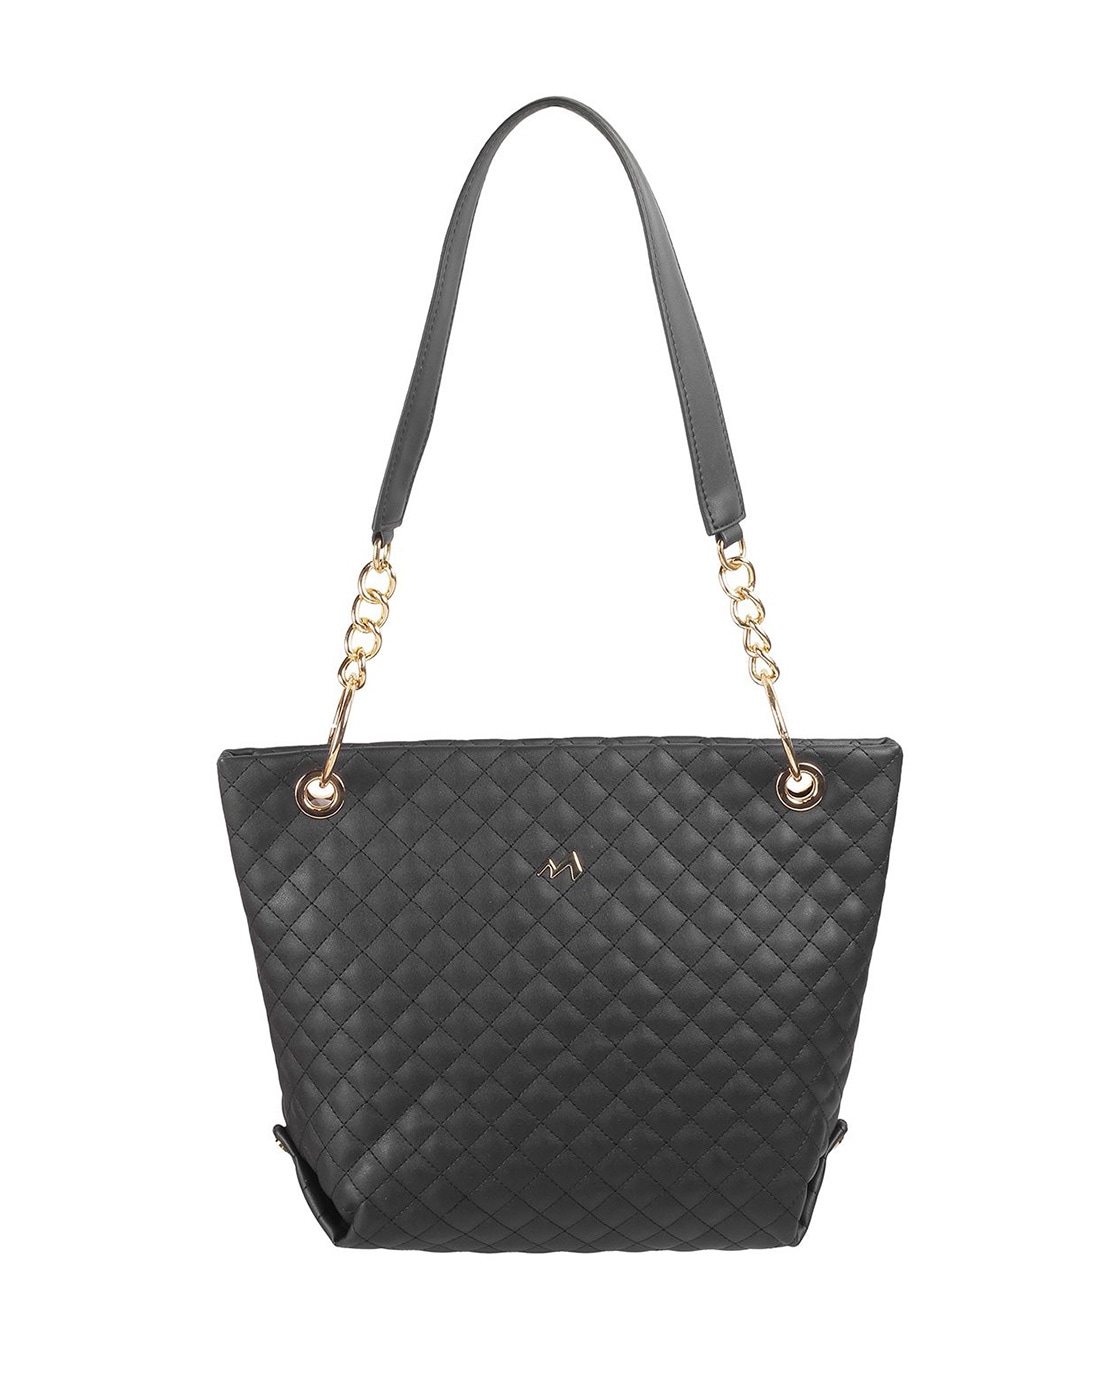 Buy Haute Sauce Women beige quilted tote bag (HSHB1275) at Amazon.in